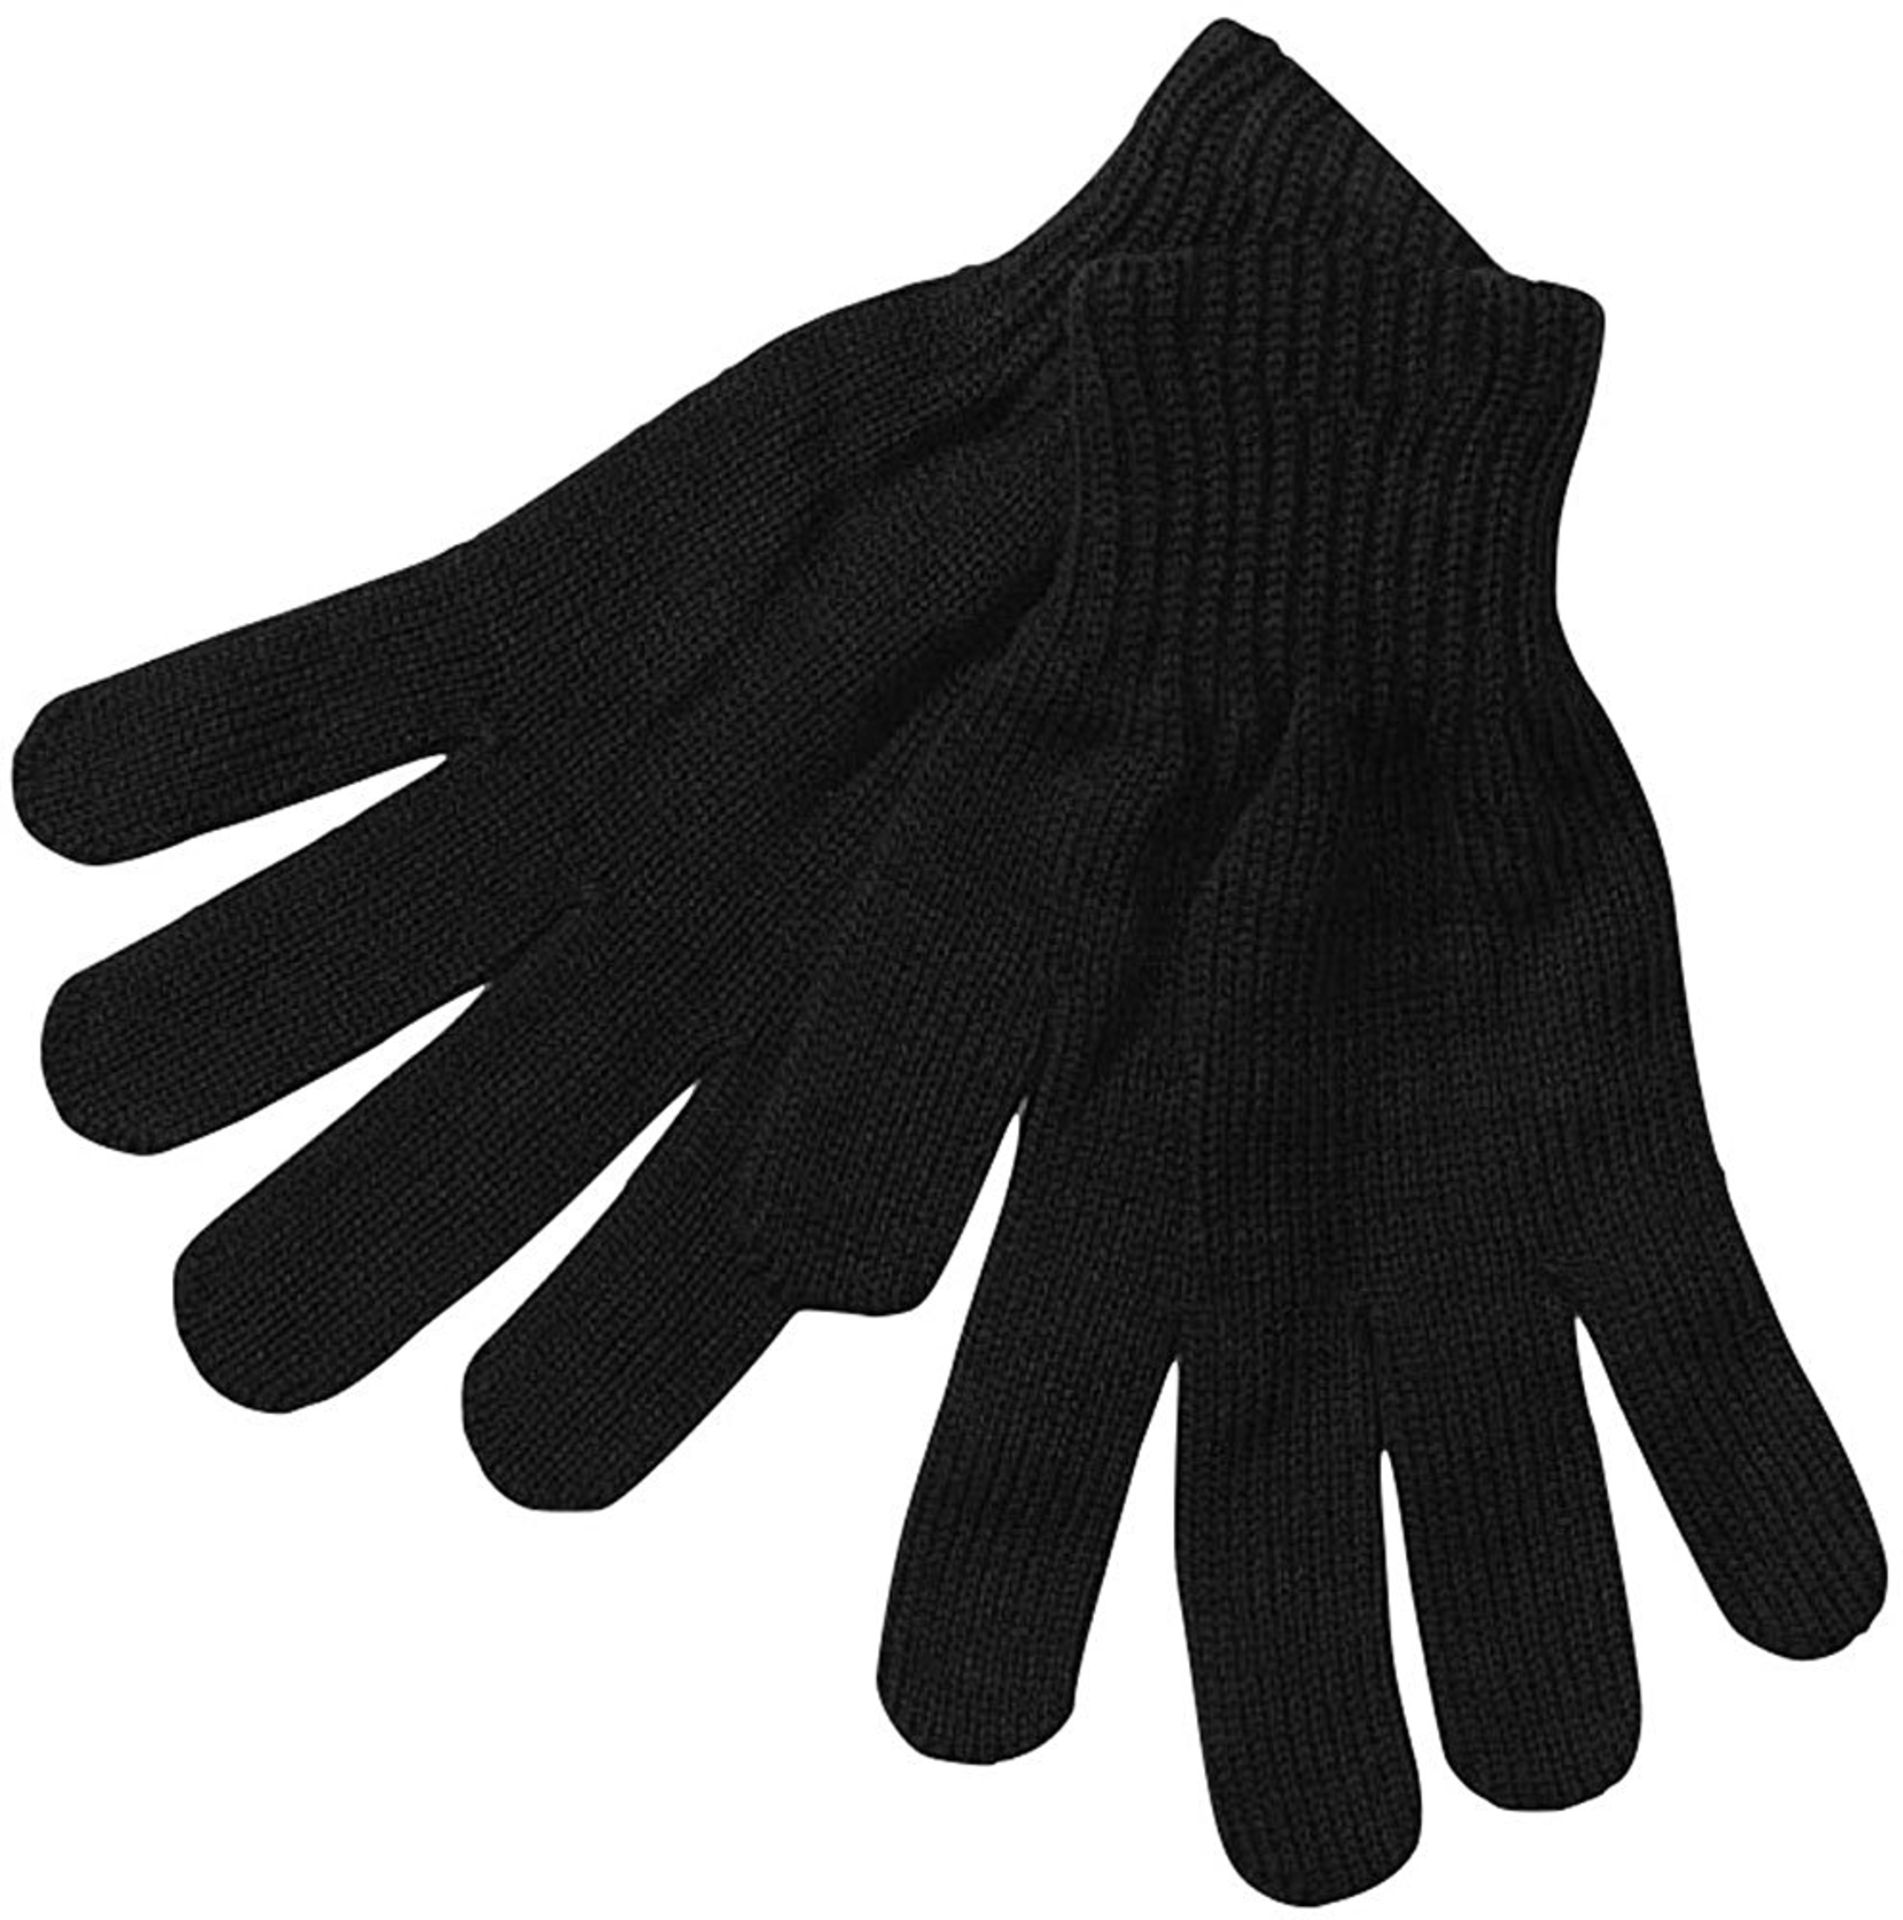 V *TRADE QTY* Brand New Job Lot of Twelve Pairs Mens Black Thermal Lined Winter Gloves RRP £3.99 Per